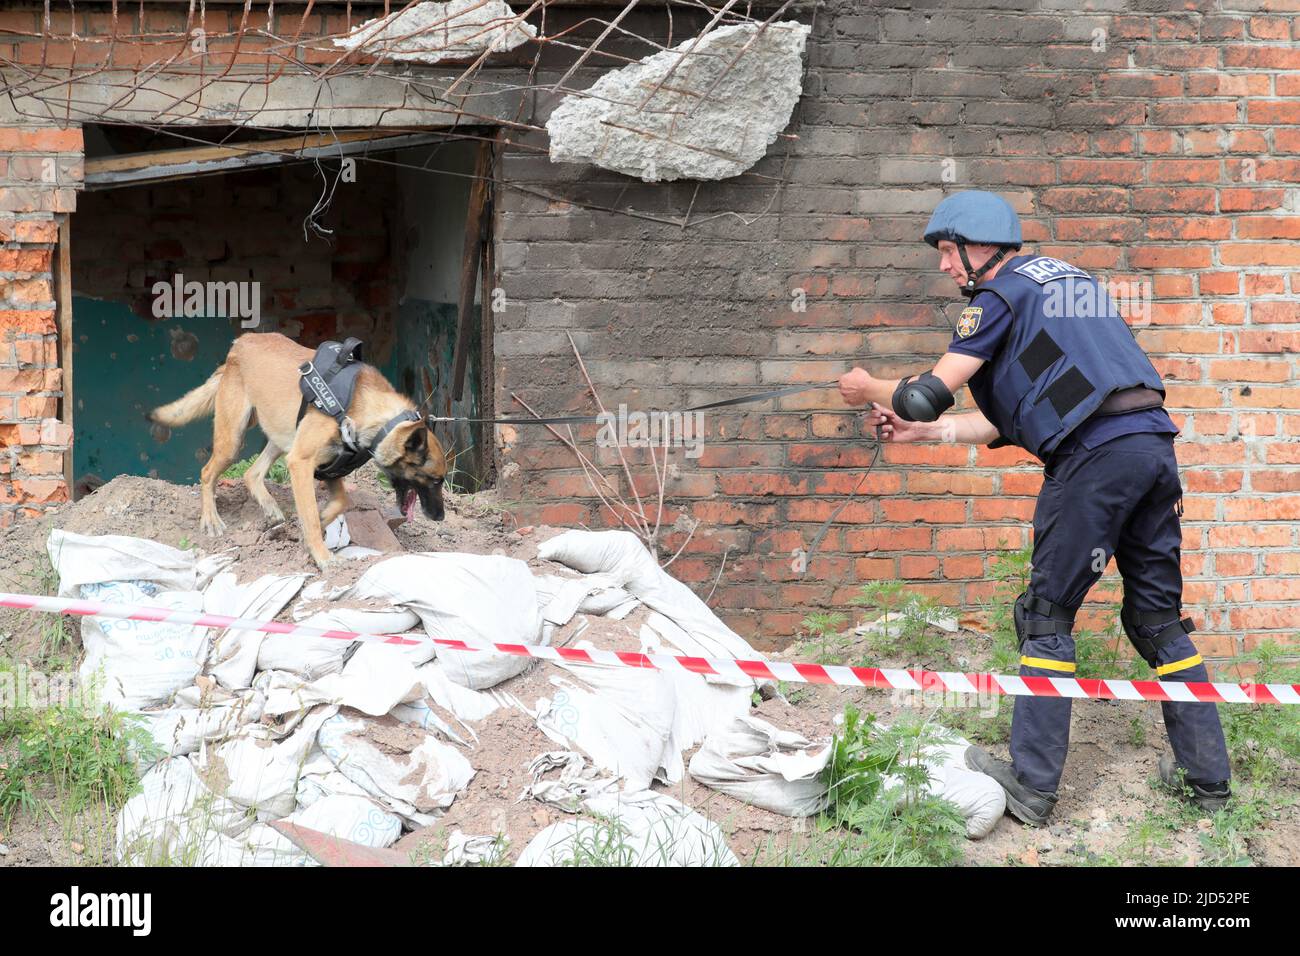 TROSTIANETS, UKRAINE - JUNE 17, 2022 - A rescuer and an explosive detection dog examine the premises of a brick plant where lots of ammunition and oth Stock Photo